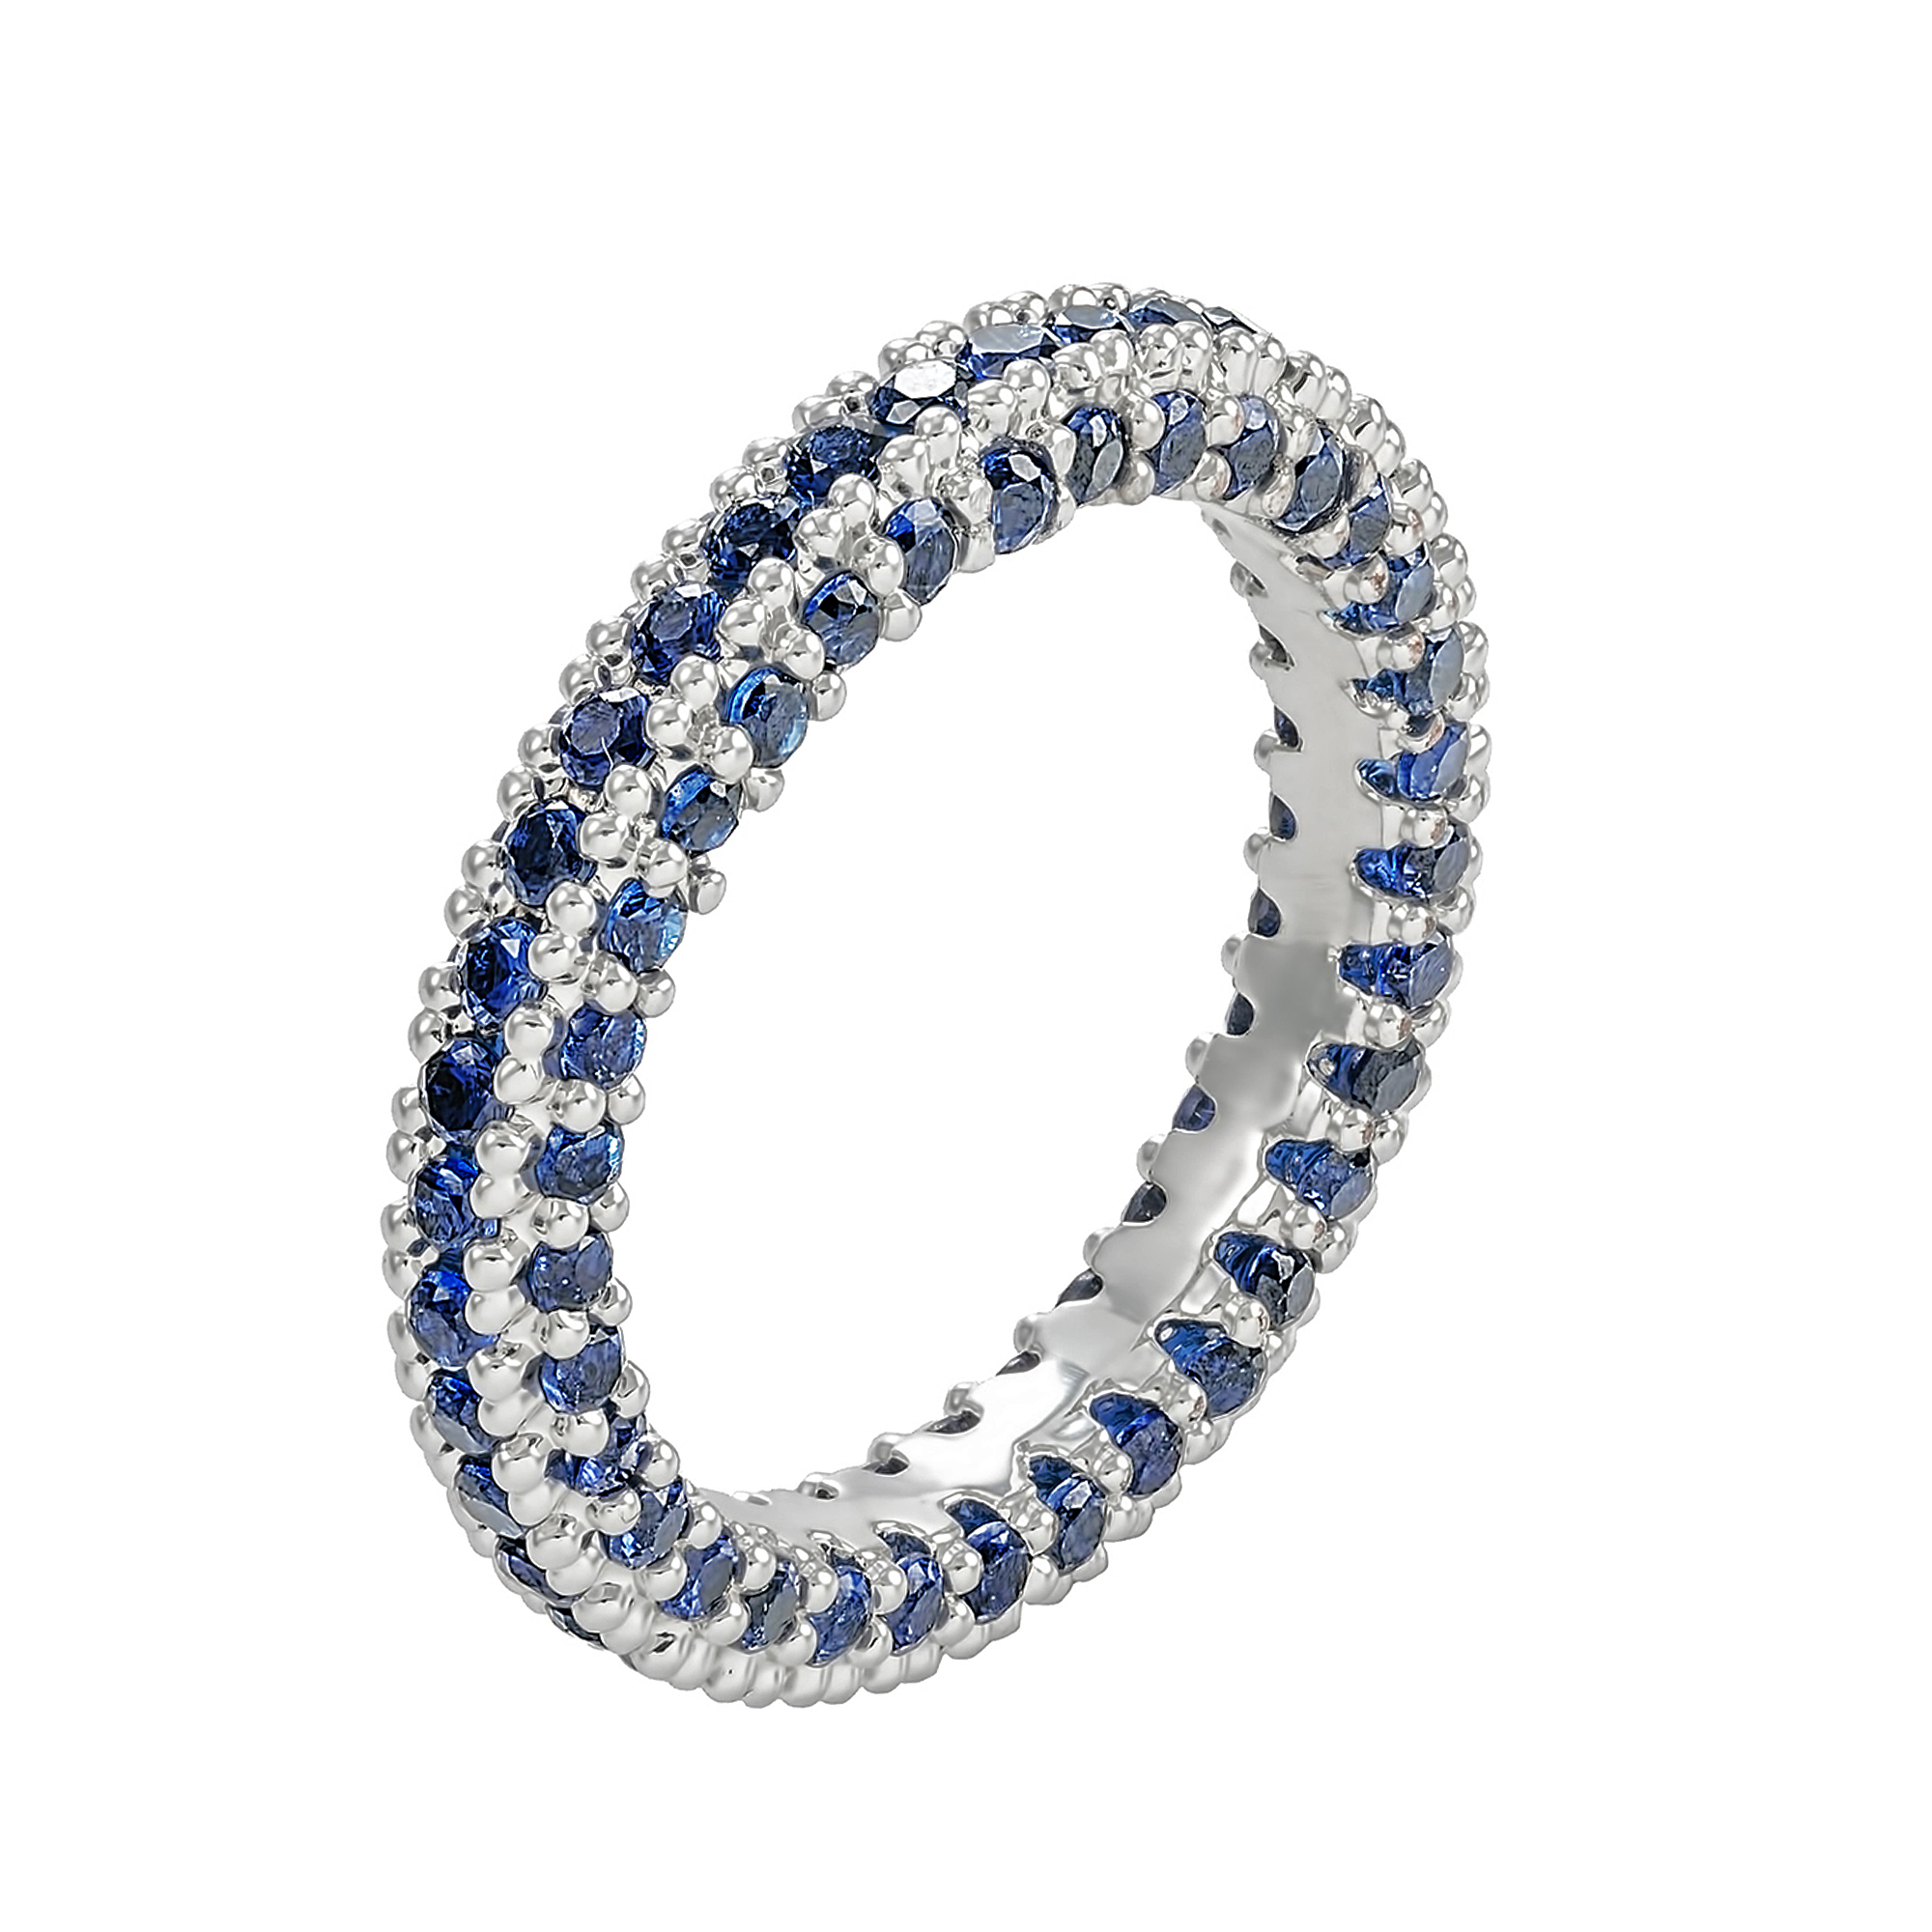 12 x Silver & Blue Eternity Band Ring with Cubic Zirconia Crystals, 4 Sizes, 3Pcs Per Size | UK SELLER | GCJ026